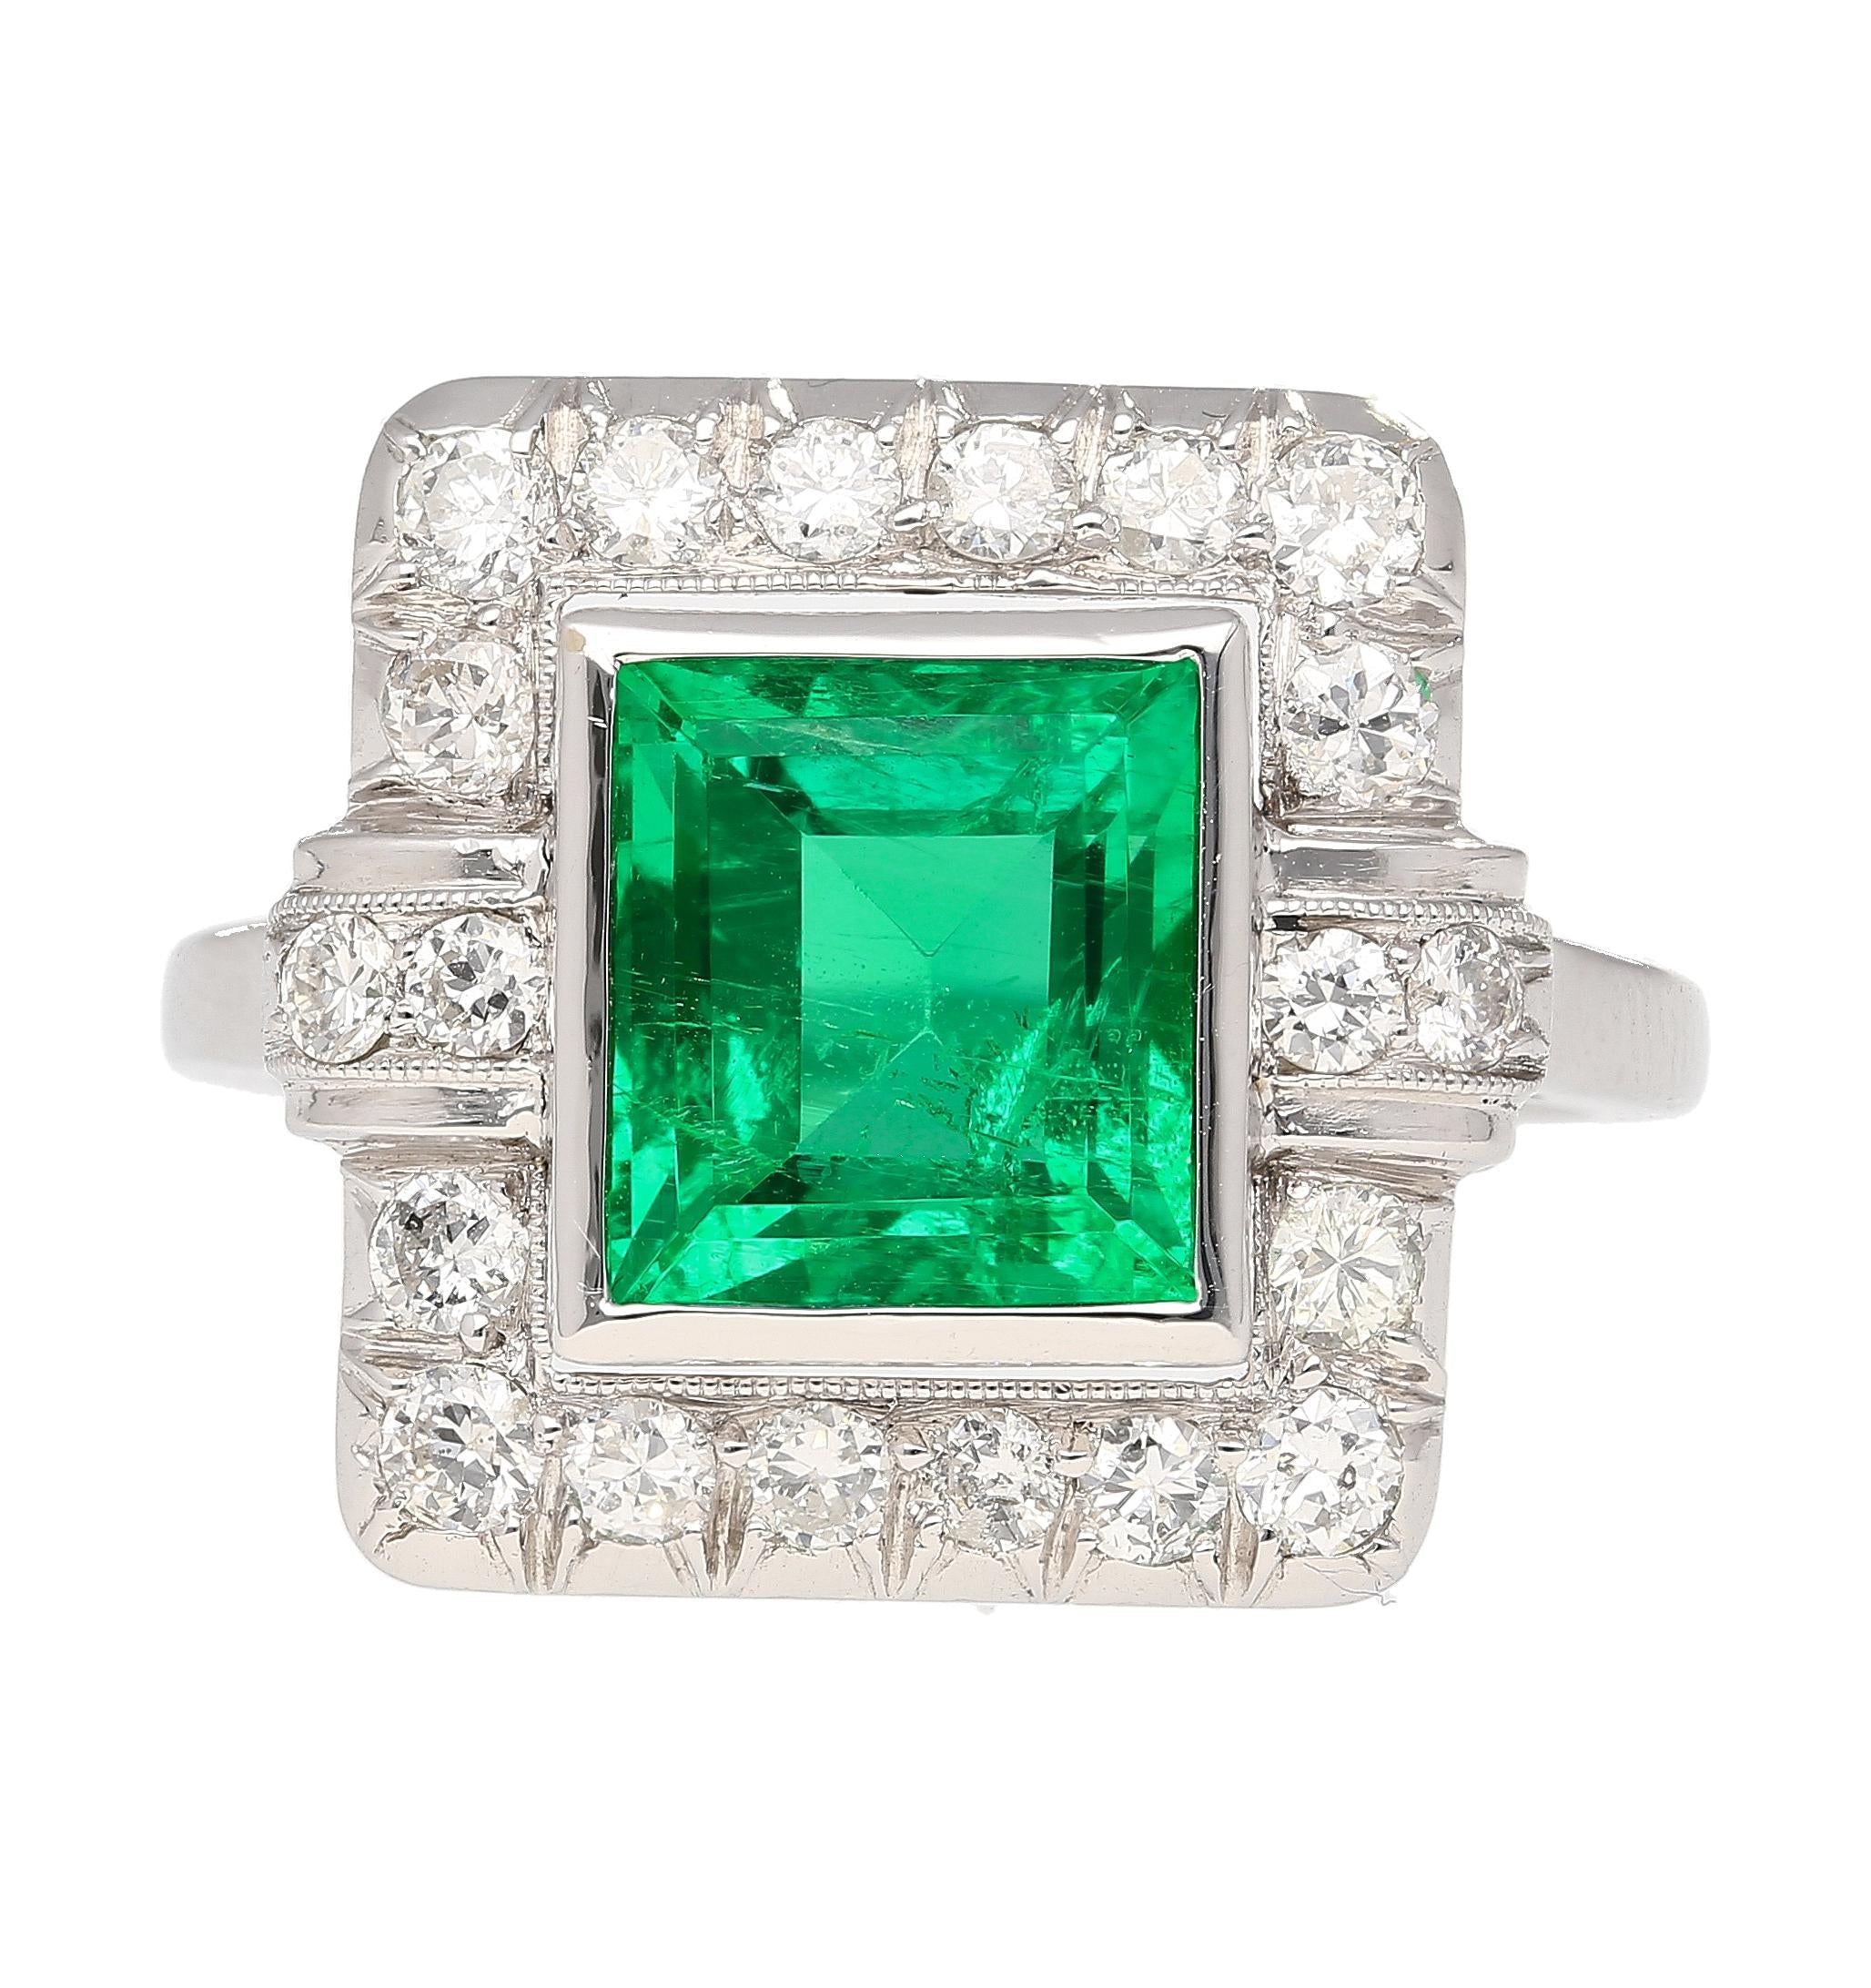 2.86 Carat Afghan-Chinese Minor Oil Emerald & Diamond Halo Ring in 18K Gold